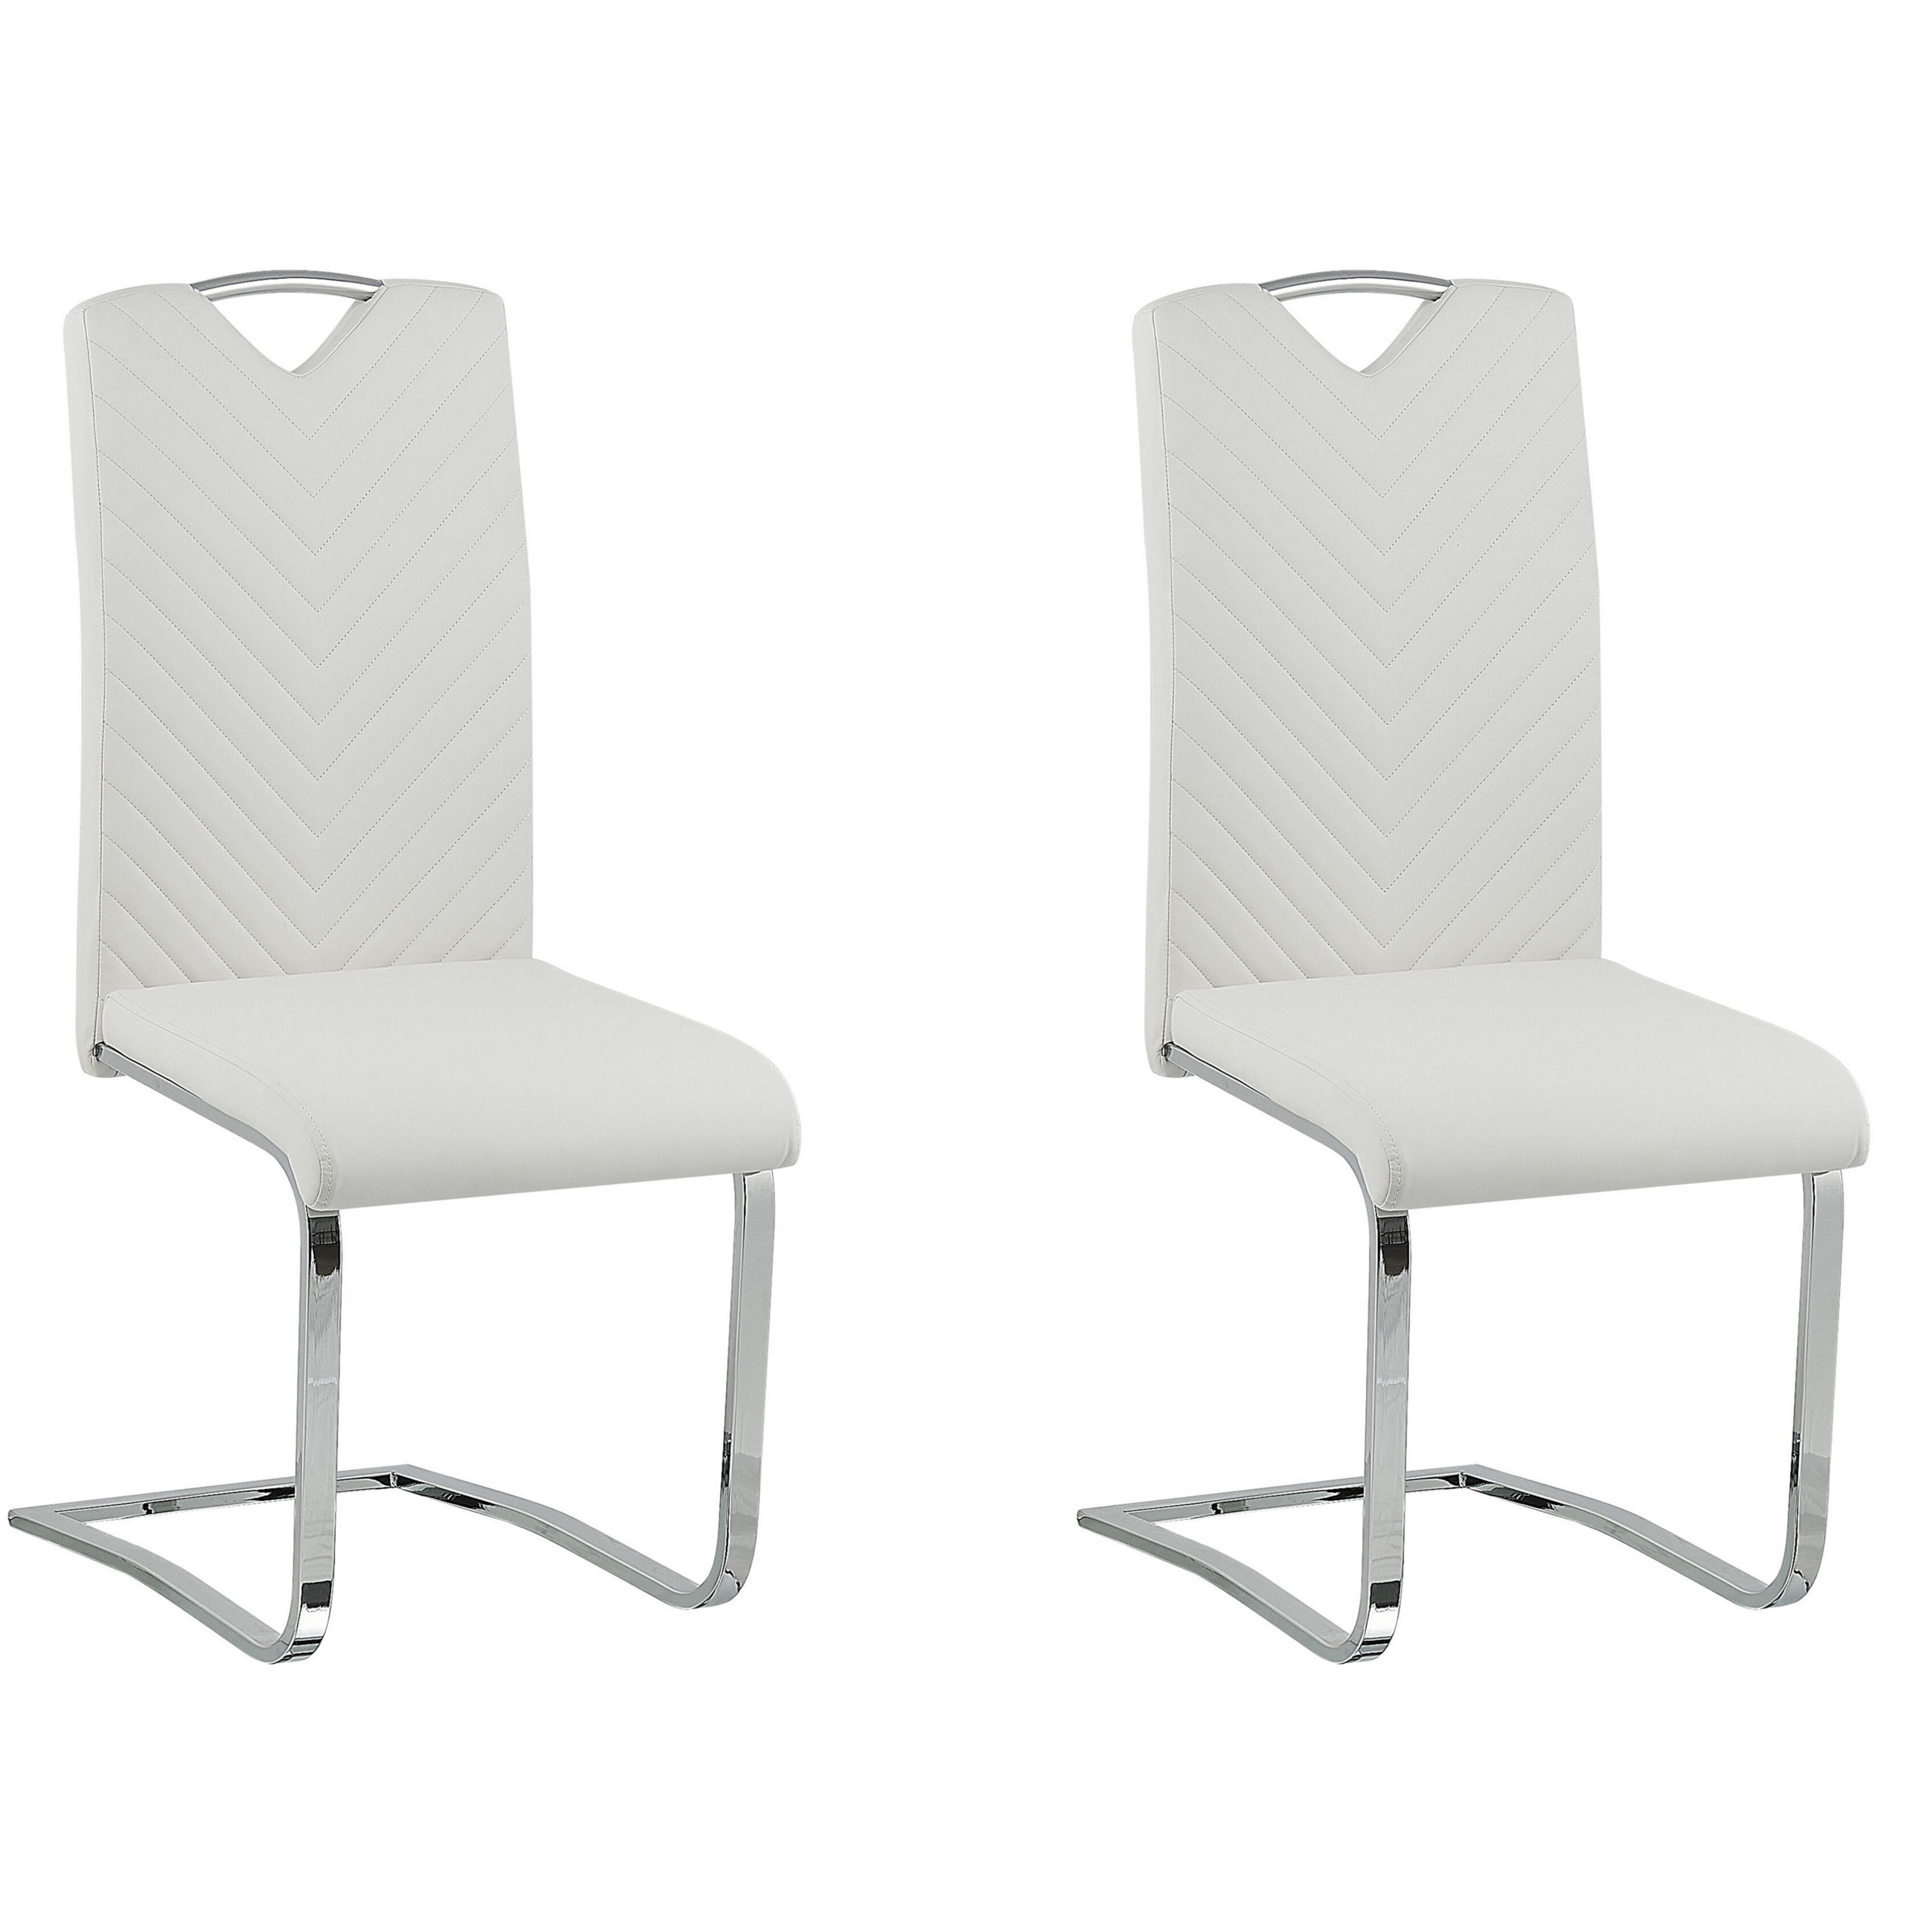 Beliani Set of 2 Dining Chairs Off-White Faux Leather Upholstered Seat High Back Cantilever Conference Room Modern